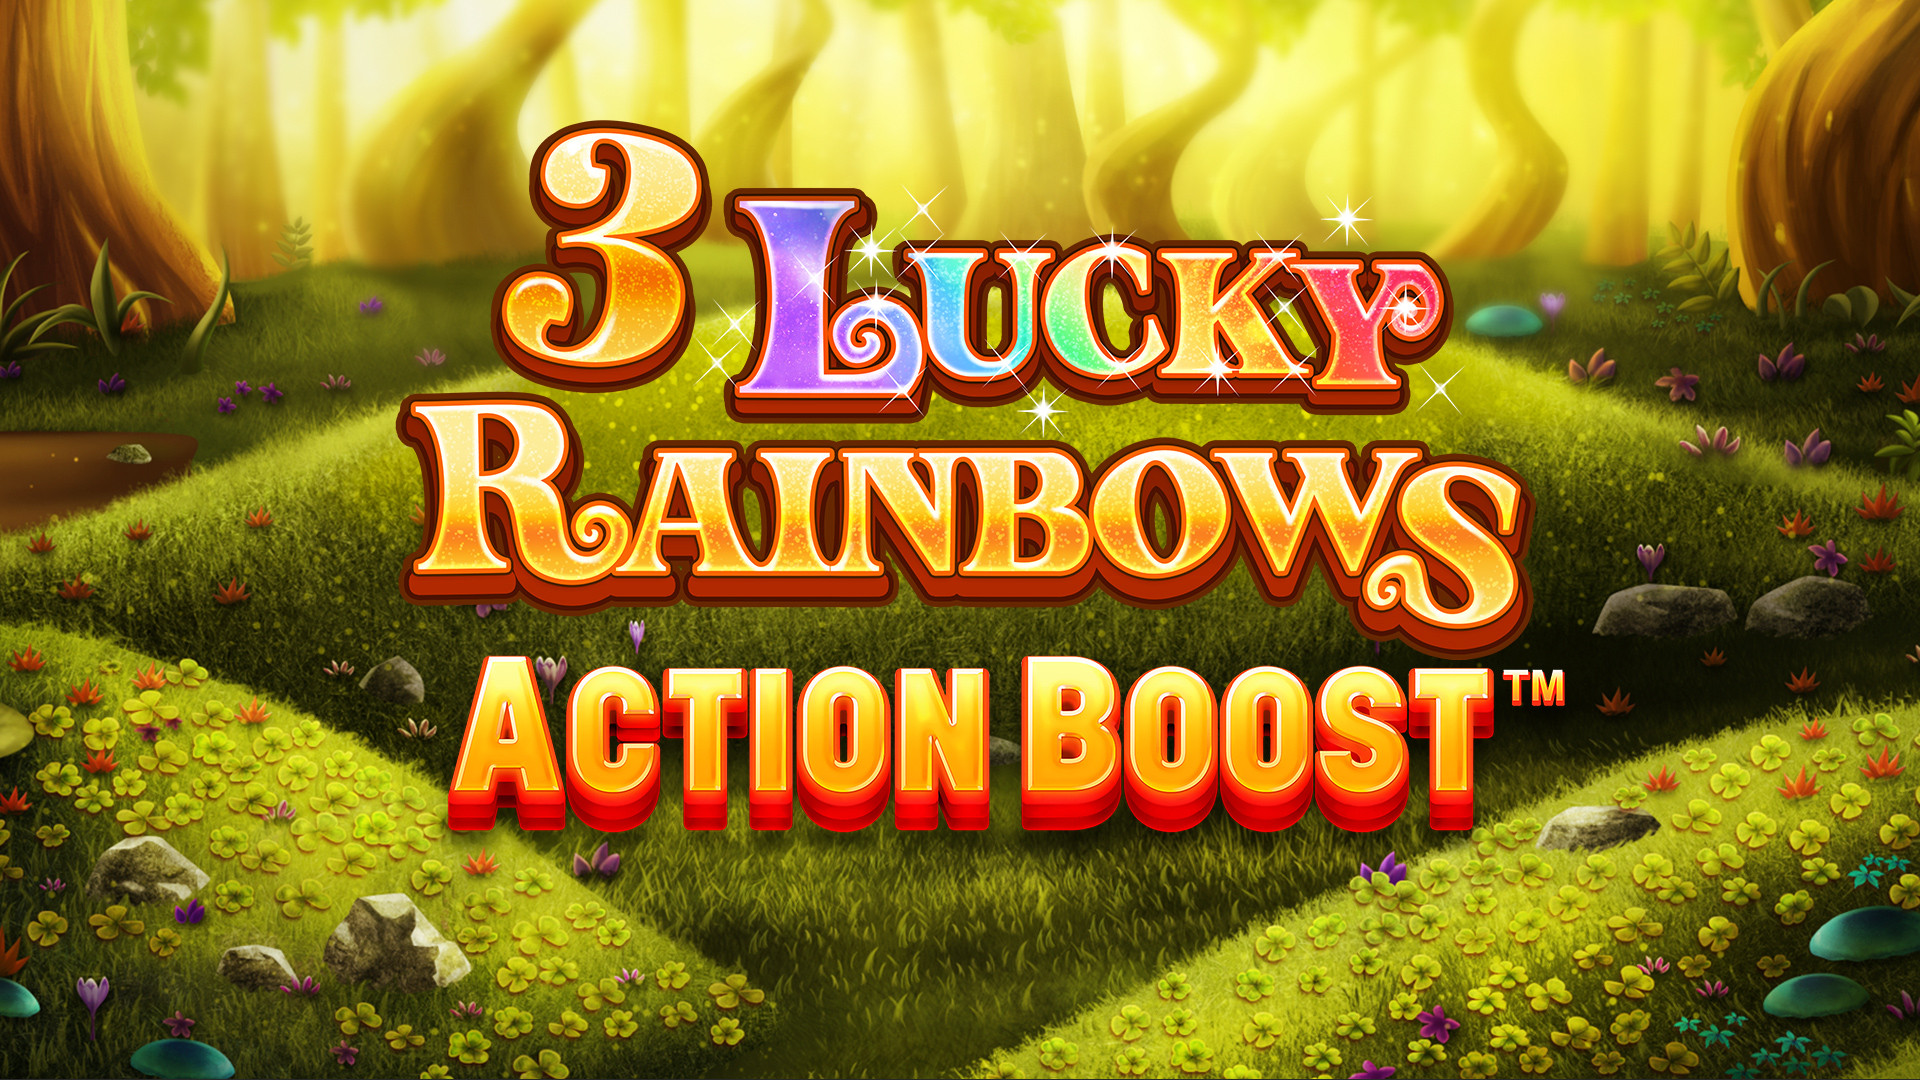 3 Lucky Rainbows Action Boost